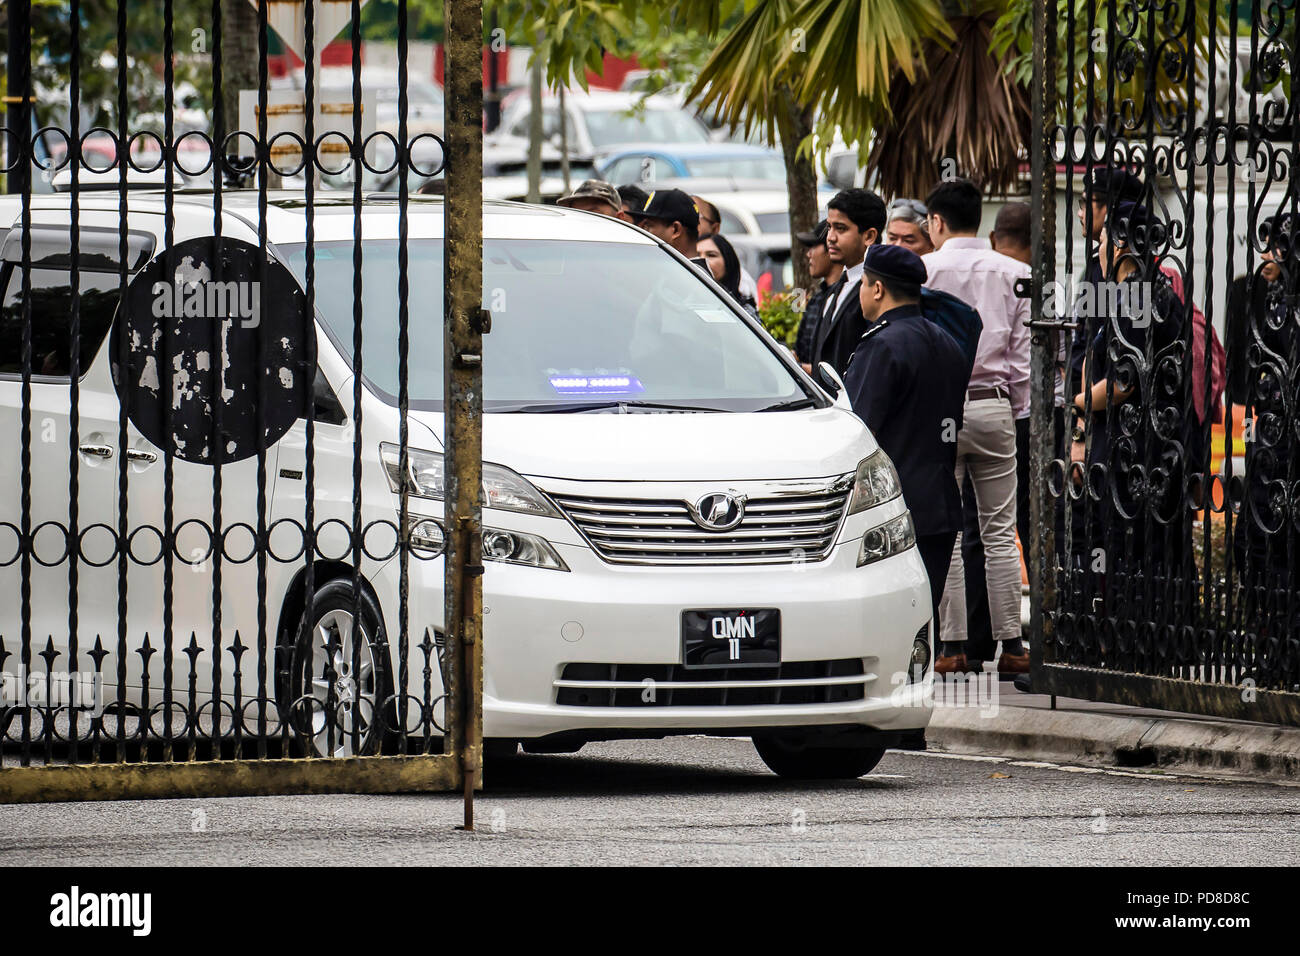 Kuala Lumpur, Malaysia. 8th August, 2018. Malaysia ex PM Najib Razak court day in Kuala Lumpur, Malaysia on August 8th, 2018. Court day to hear latest additional related charges of money laundering. © Danny Chan/Alamy Live News. Stock Photo